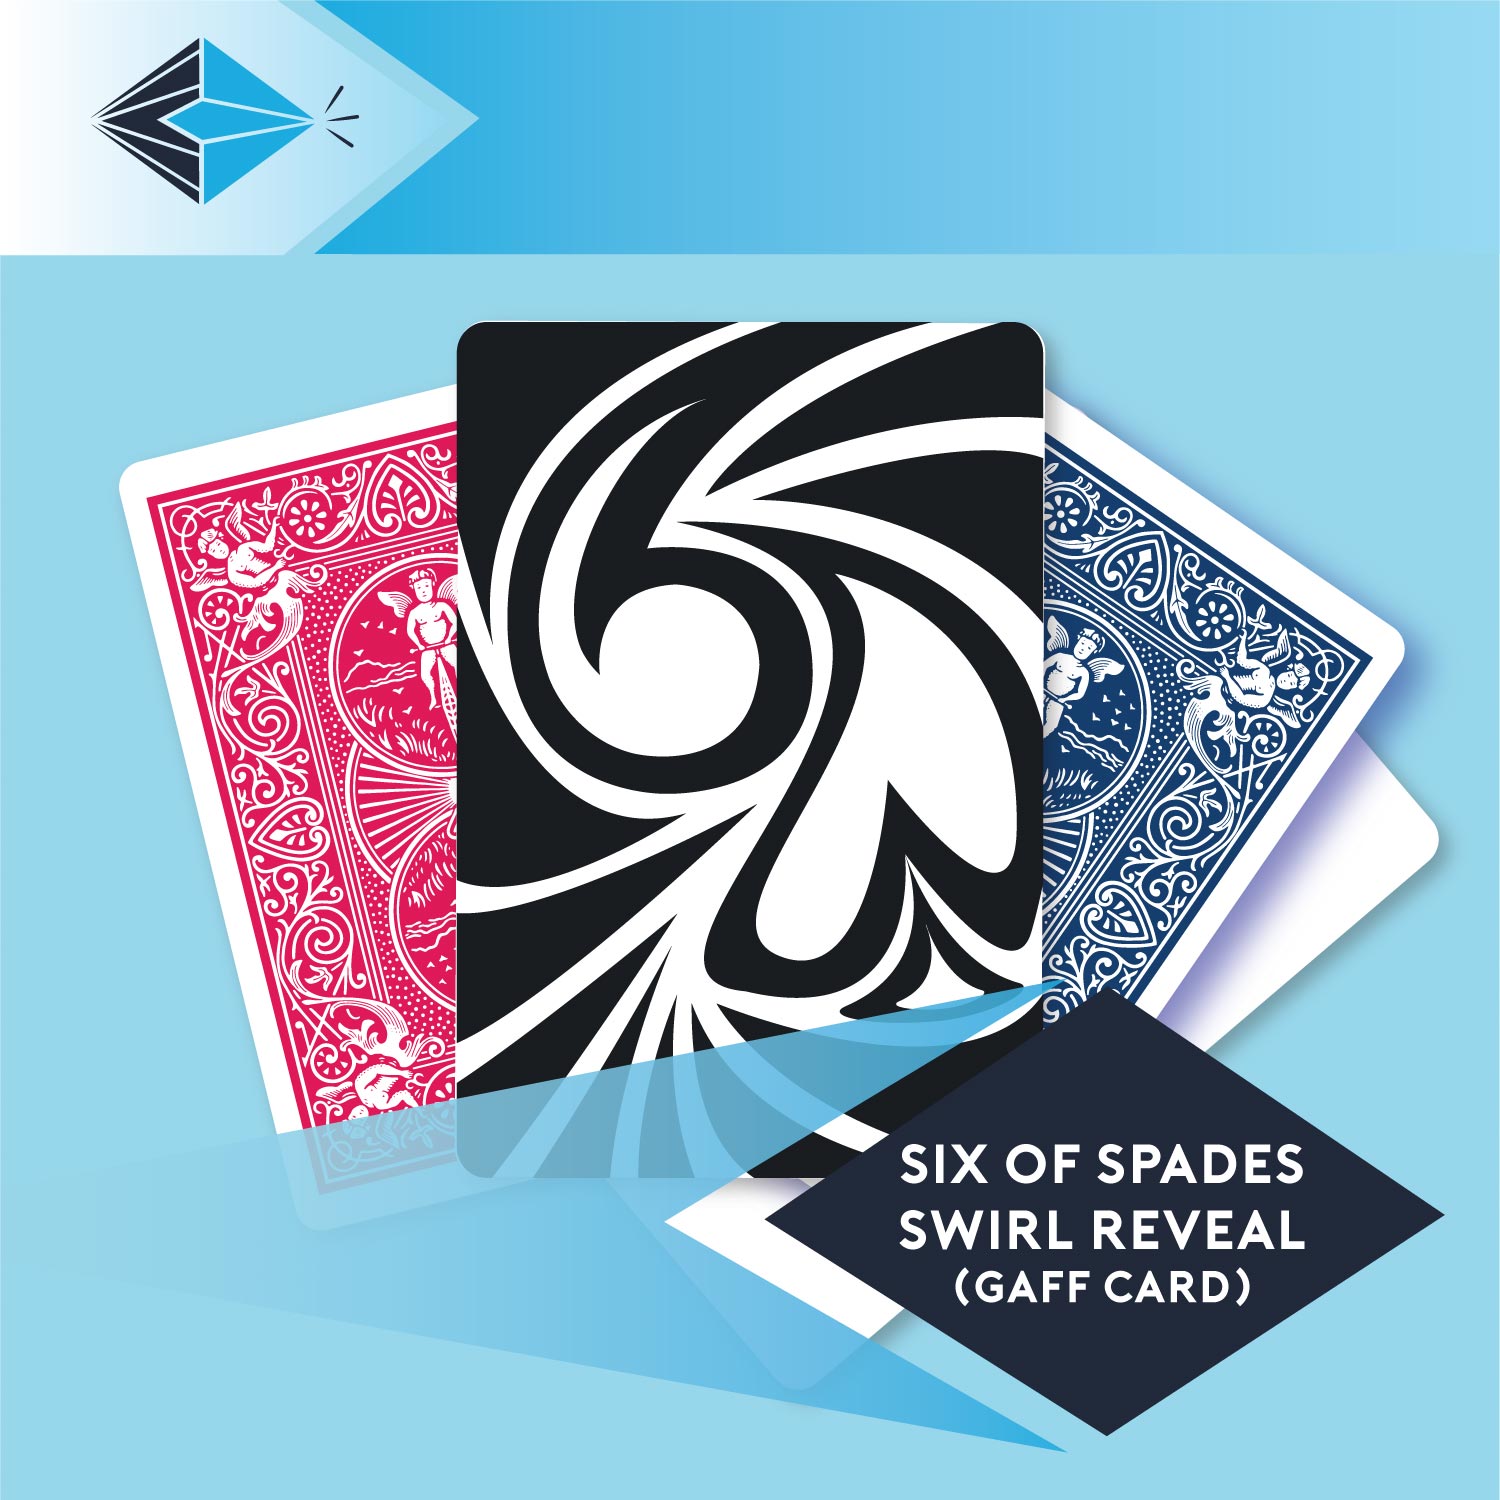 Six Of Spades Swirl reveal gaff card 2 printbymagic magicians gaff cards printers Stockport Manchester UK